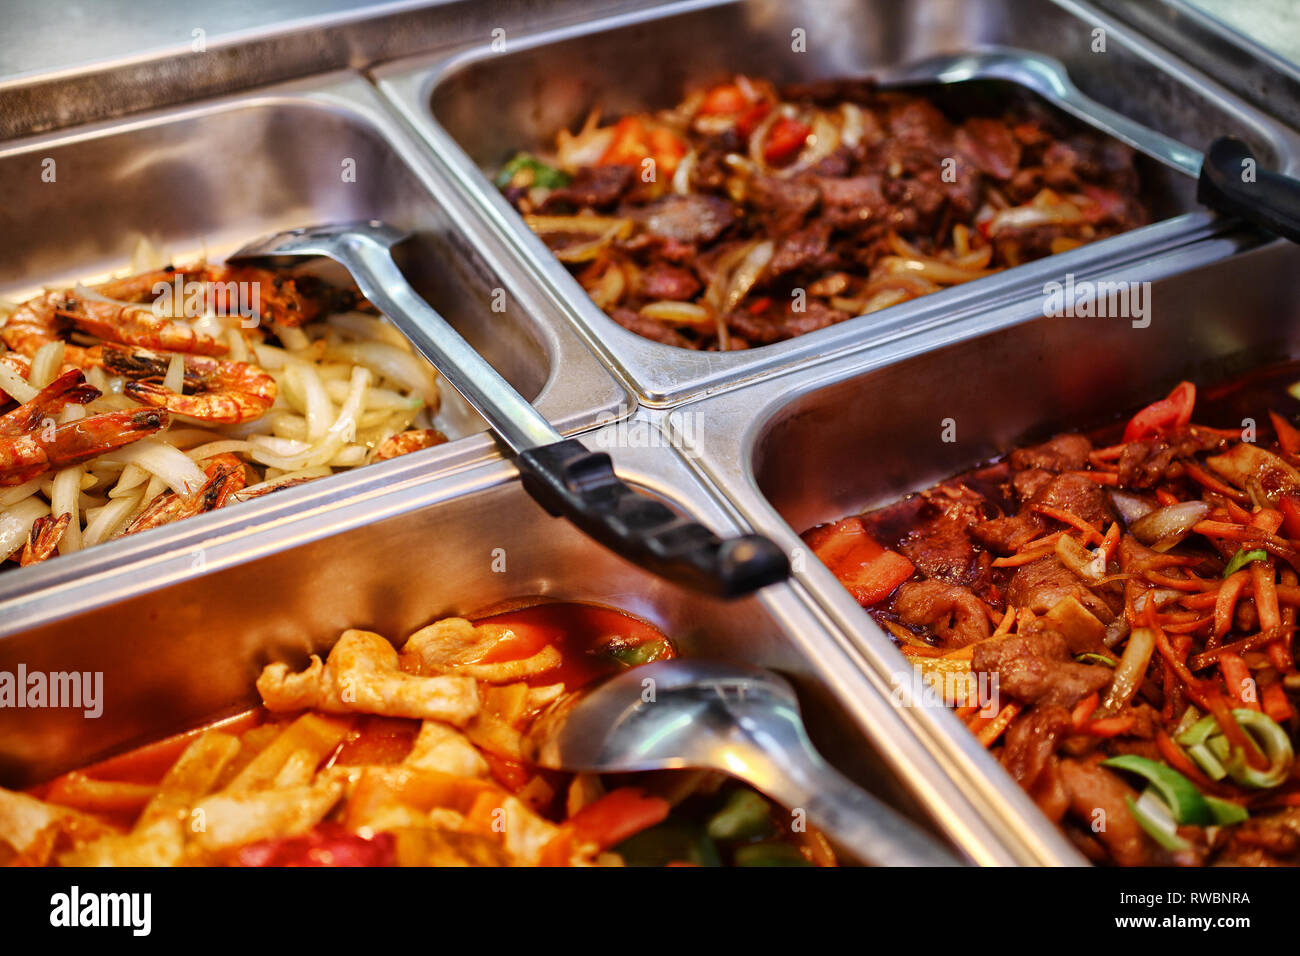 All you can eat -Buffet in a China Restaurant Stock Photo